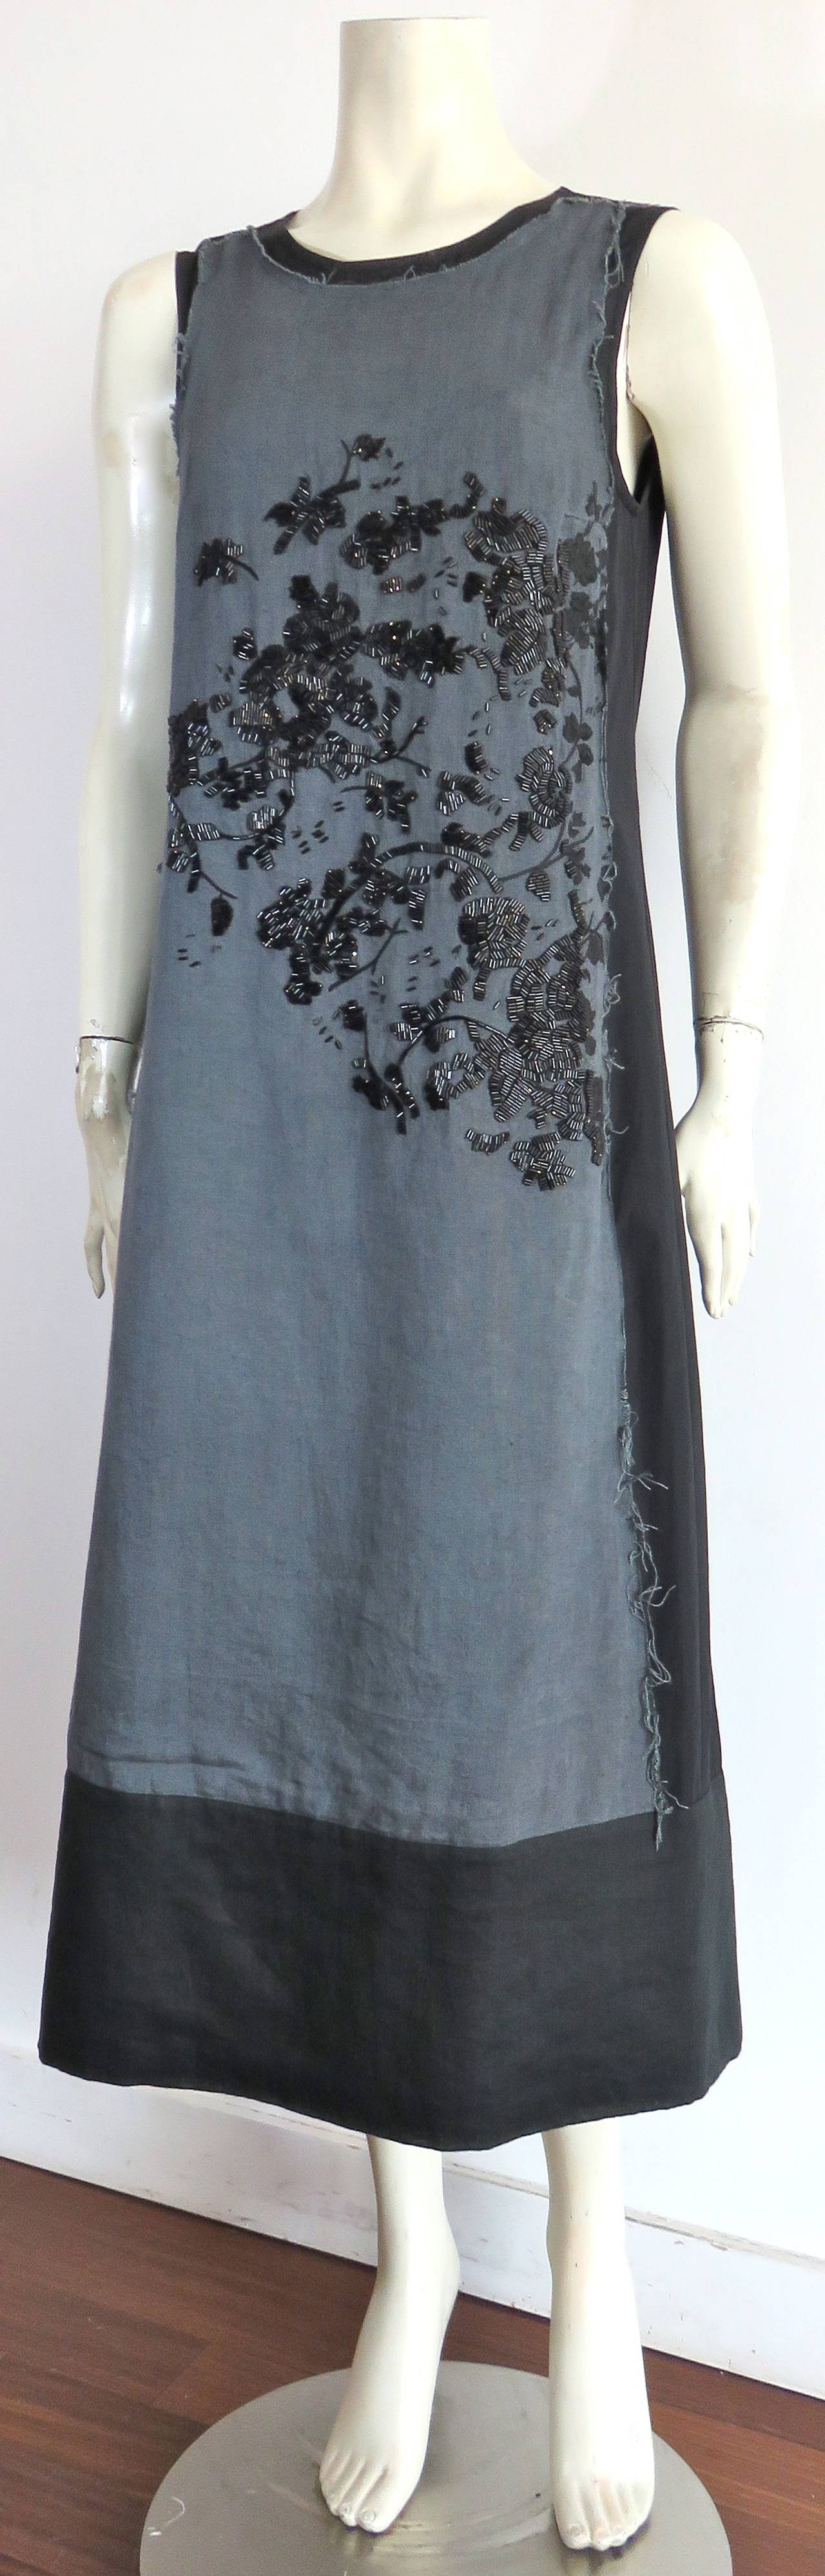 Excellent condition, DRIES VAN NOTEN Belgian linen dress with floral beading and embroidery.

The gray, belgian linen dress panel is stitched down to the front of the dress with raw-edged finishing at the edges. The front, woven panel features a